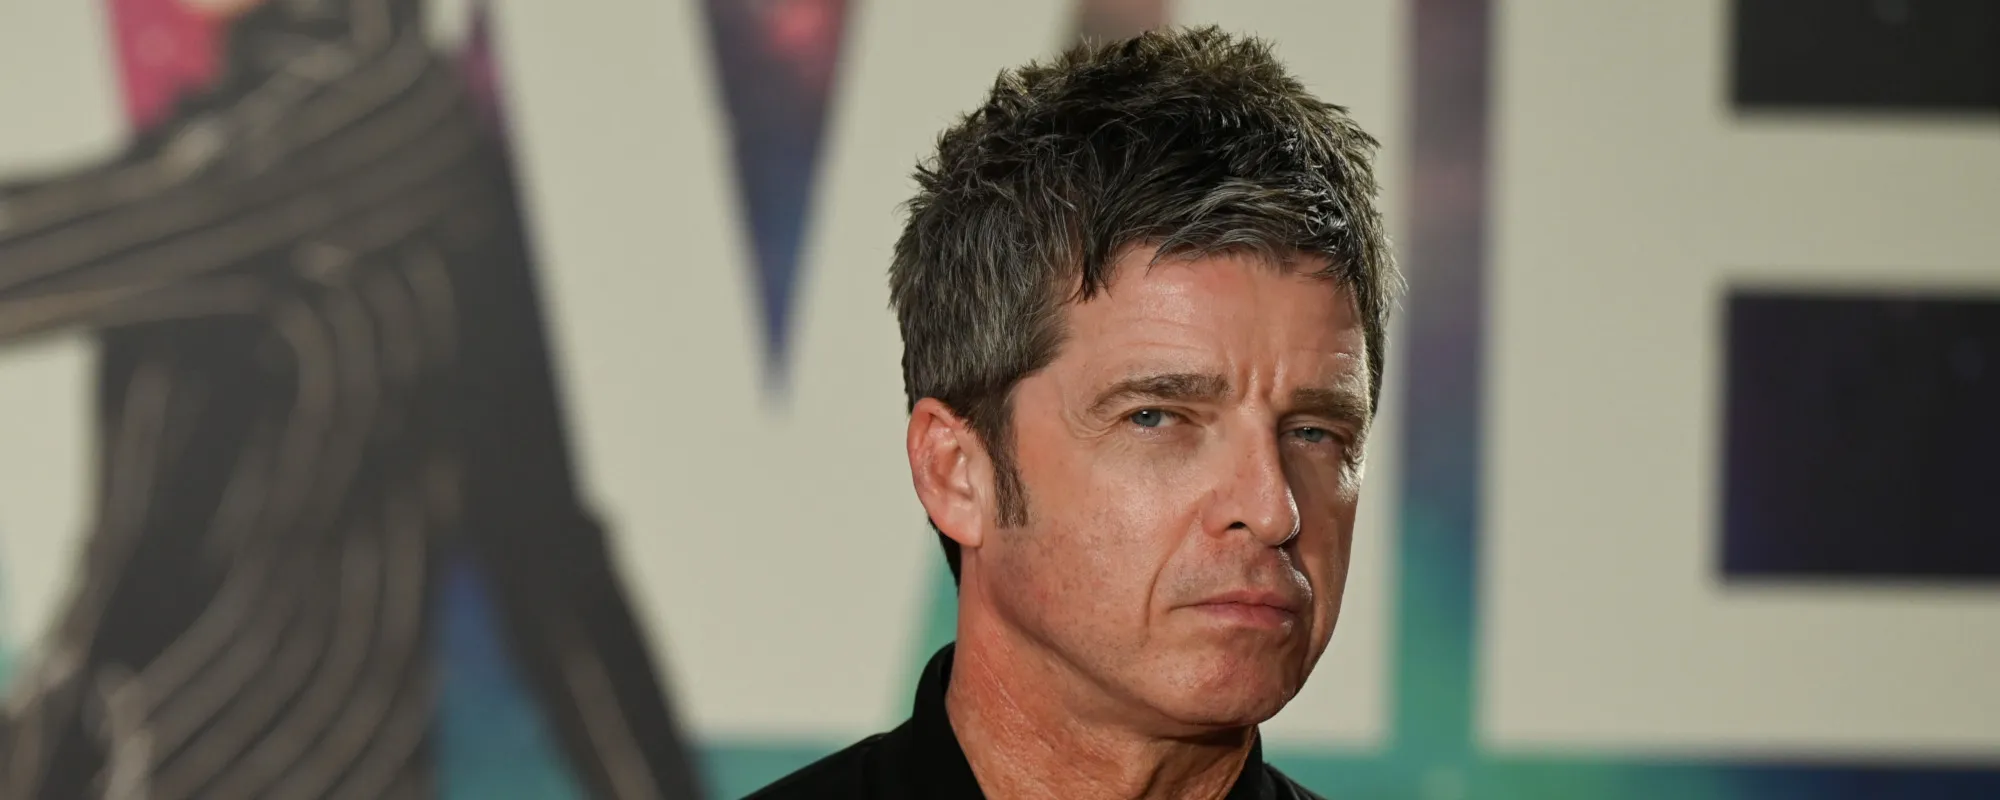 The Cure’s Robert Smith Crafts Remix of Noel Gallagher’s “Pretty Boy”